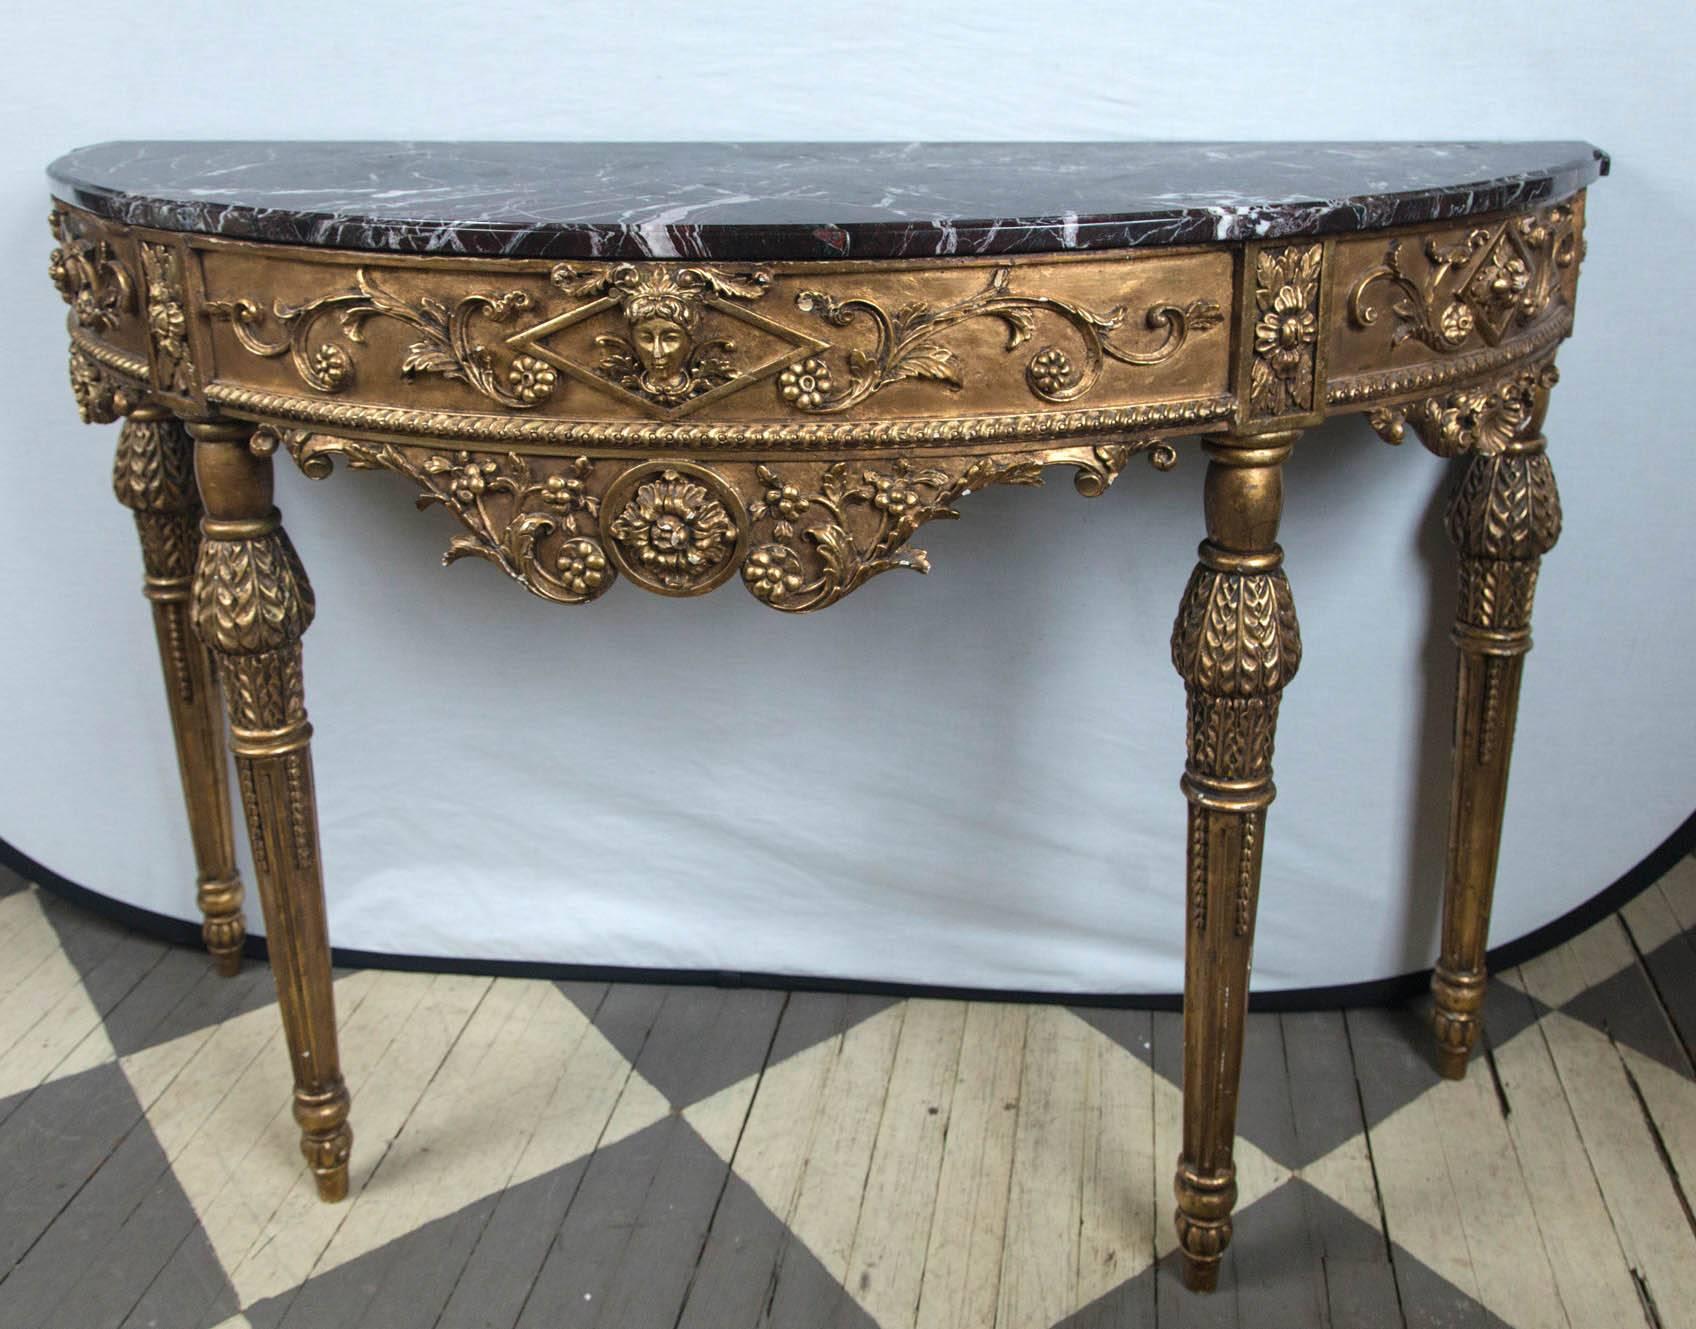 Neoclassical style console, on four legs. The apron is centered by a female head, and fully decorated around with swags and flowers, Lower decorated aprons. Dark red and white marble. Gesso and gilt decoration.